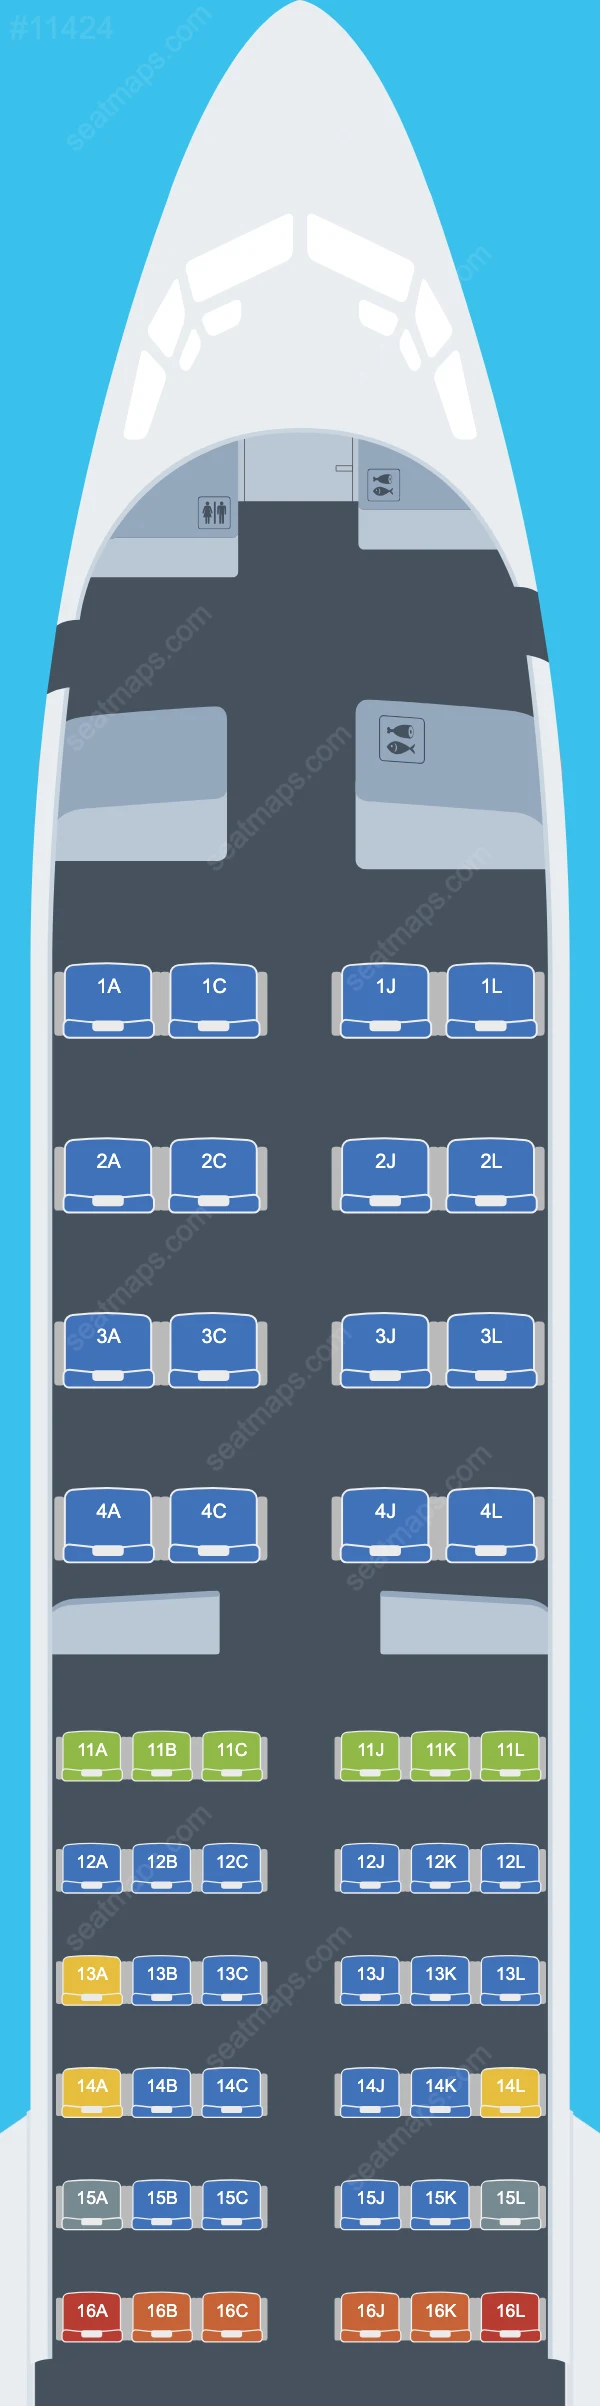 ASKY Airlines Boeing 737 MAX 8 aircraft seat map  737 MAX 8